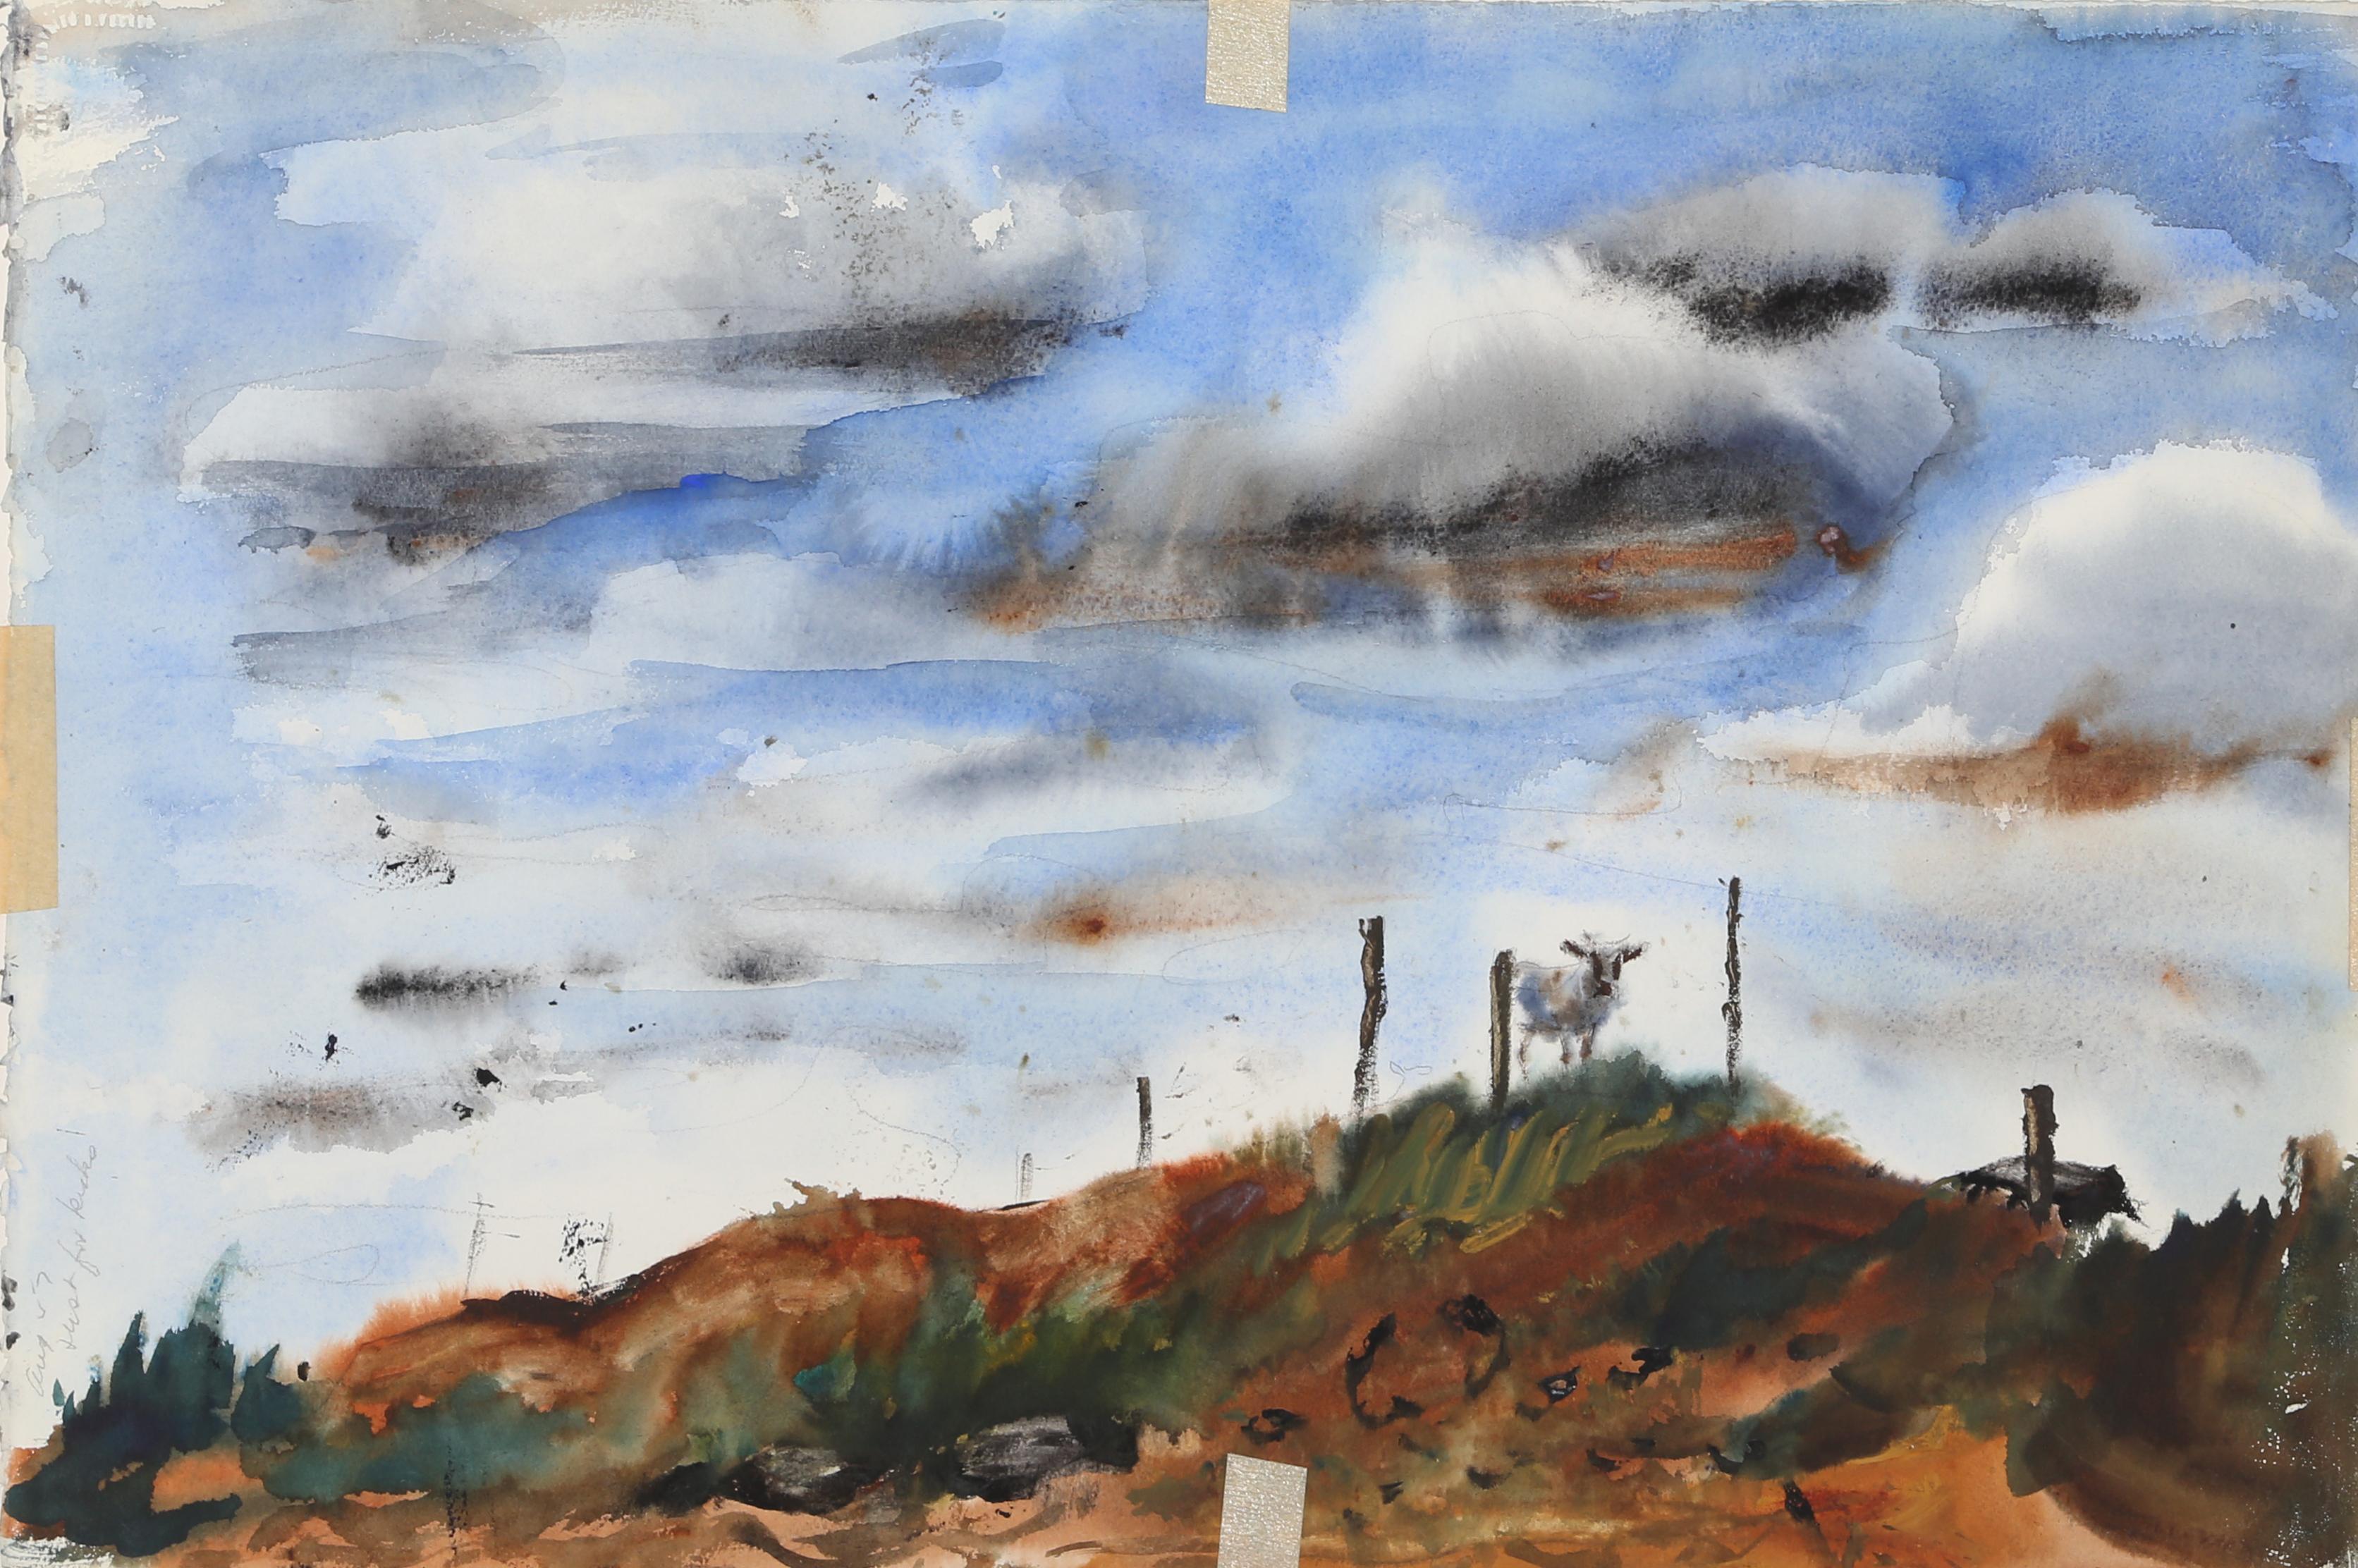 Artist: Eve Nethercott, American (1925 - )
Title: West Hampton (P3.32)
Year: 1958
Medium: Watercolor on Paper (Double-Sided), annotated
Size: 14 x 19.5 in. (35.56 x 49.53 cm)

Other side 1957
